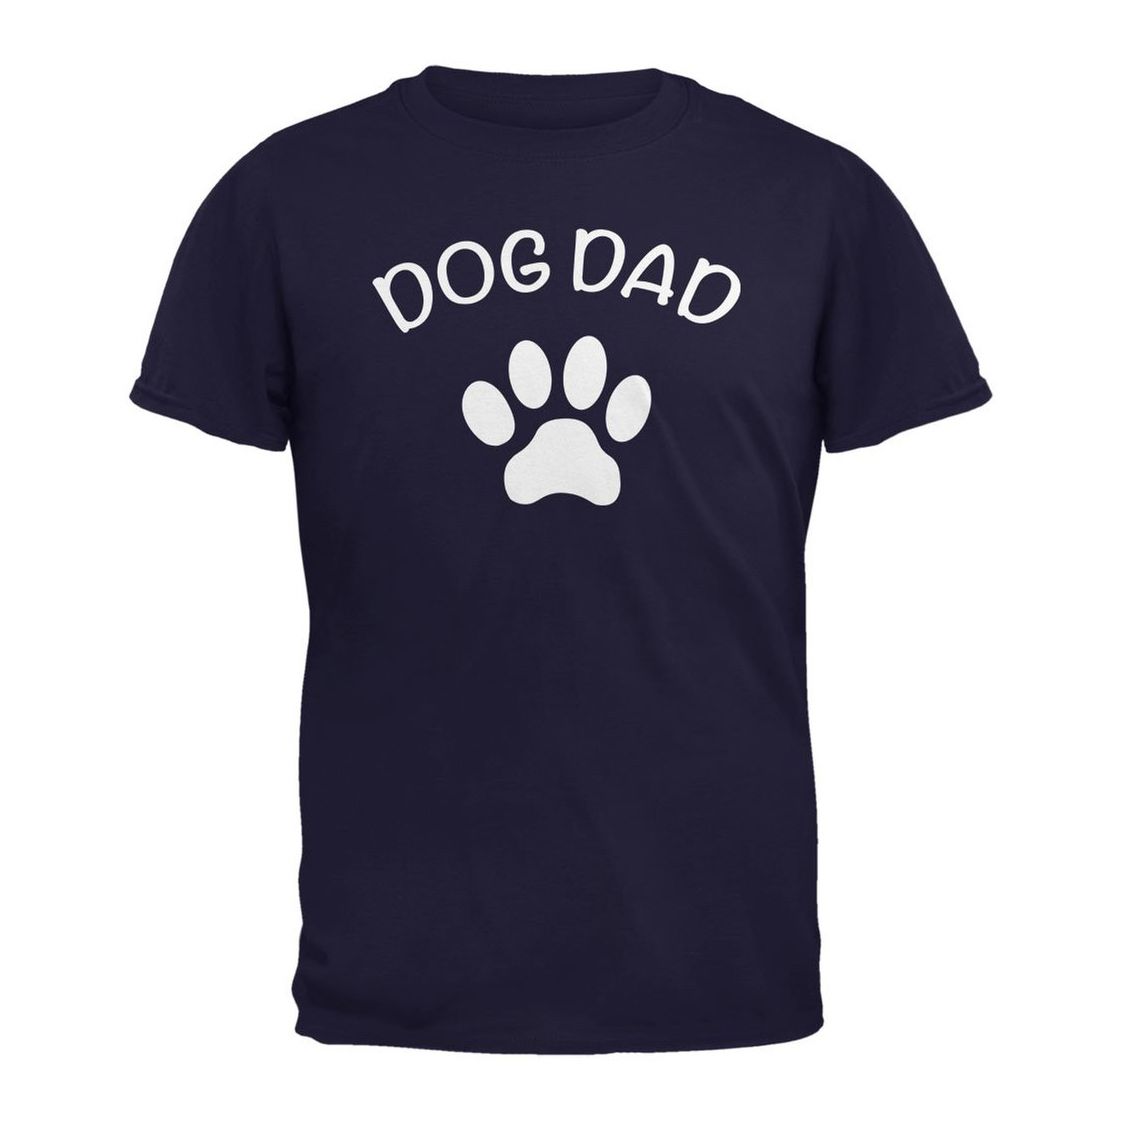 Product photo of a Father's Day Dog Dad T-Shirt on a white background